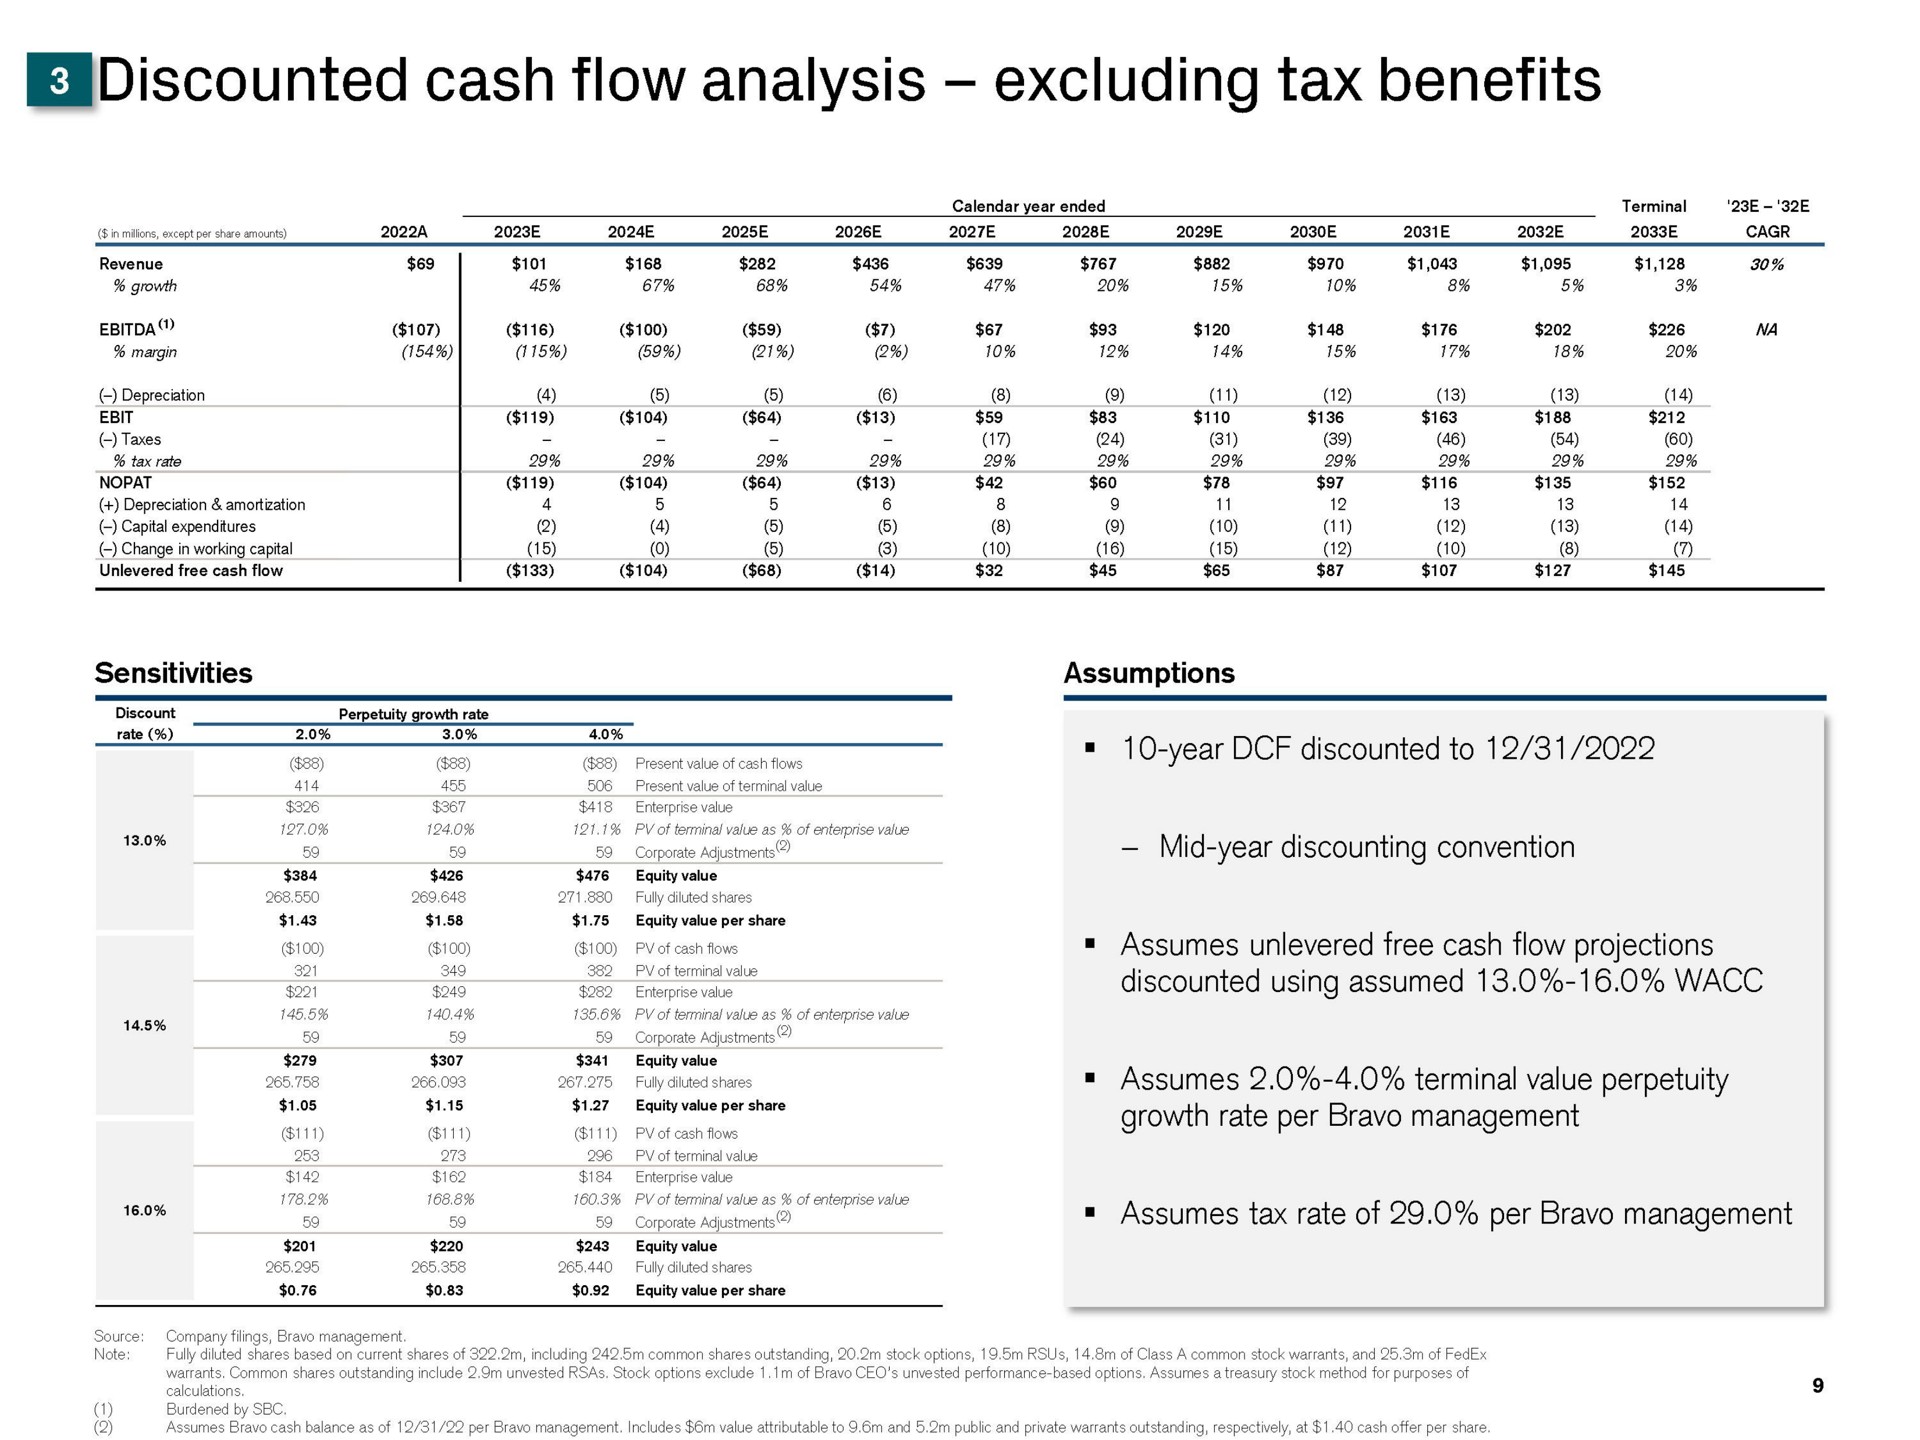 discounted cash flow analysis excluding tax benefits a i cash flows boa assumes free cash flow projections discounted using assumed growth rate per bravo management assumes tax rate of per bravo management | Credit Suisse